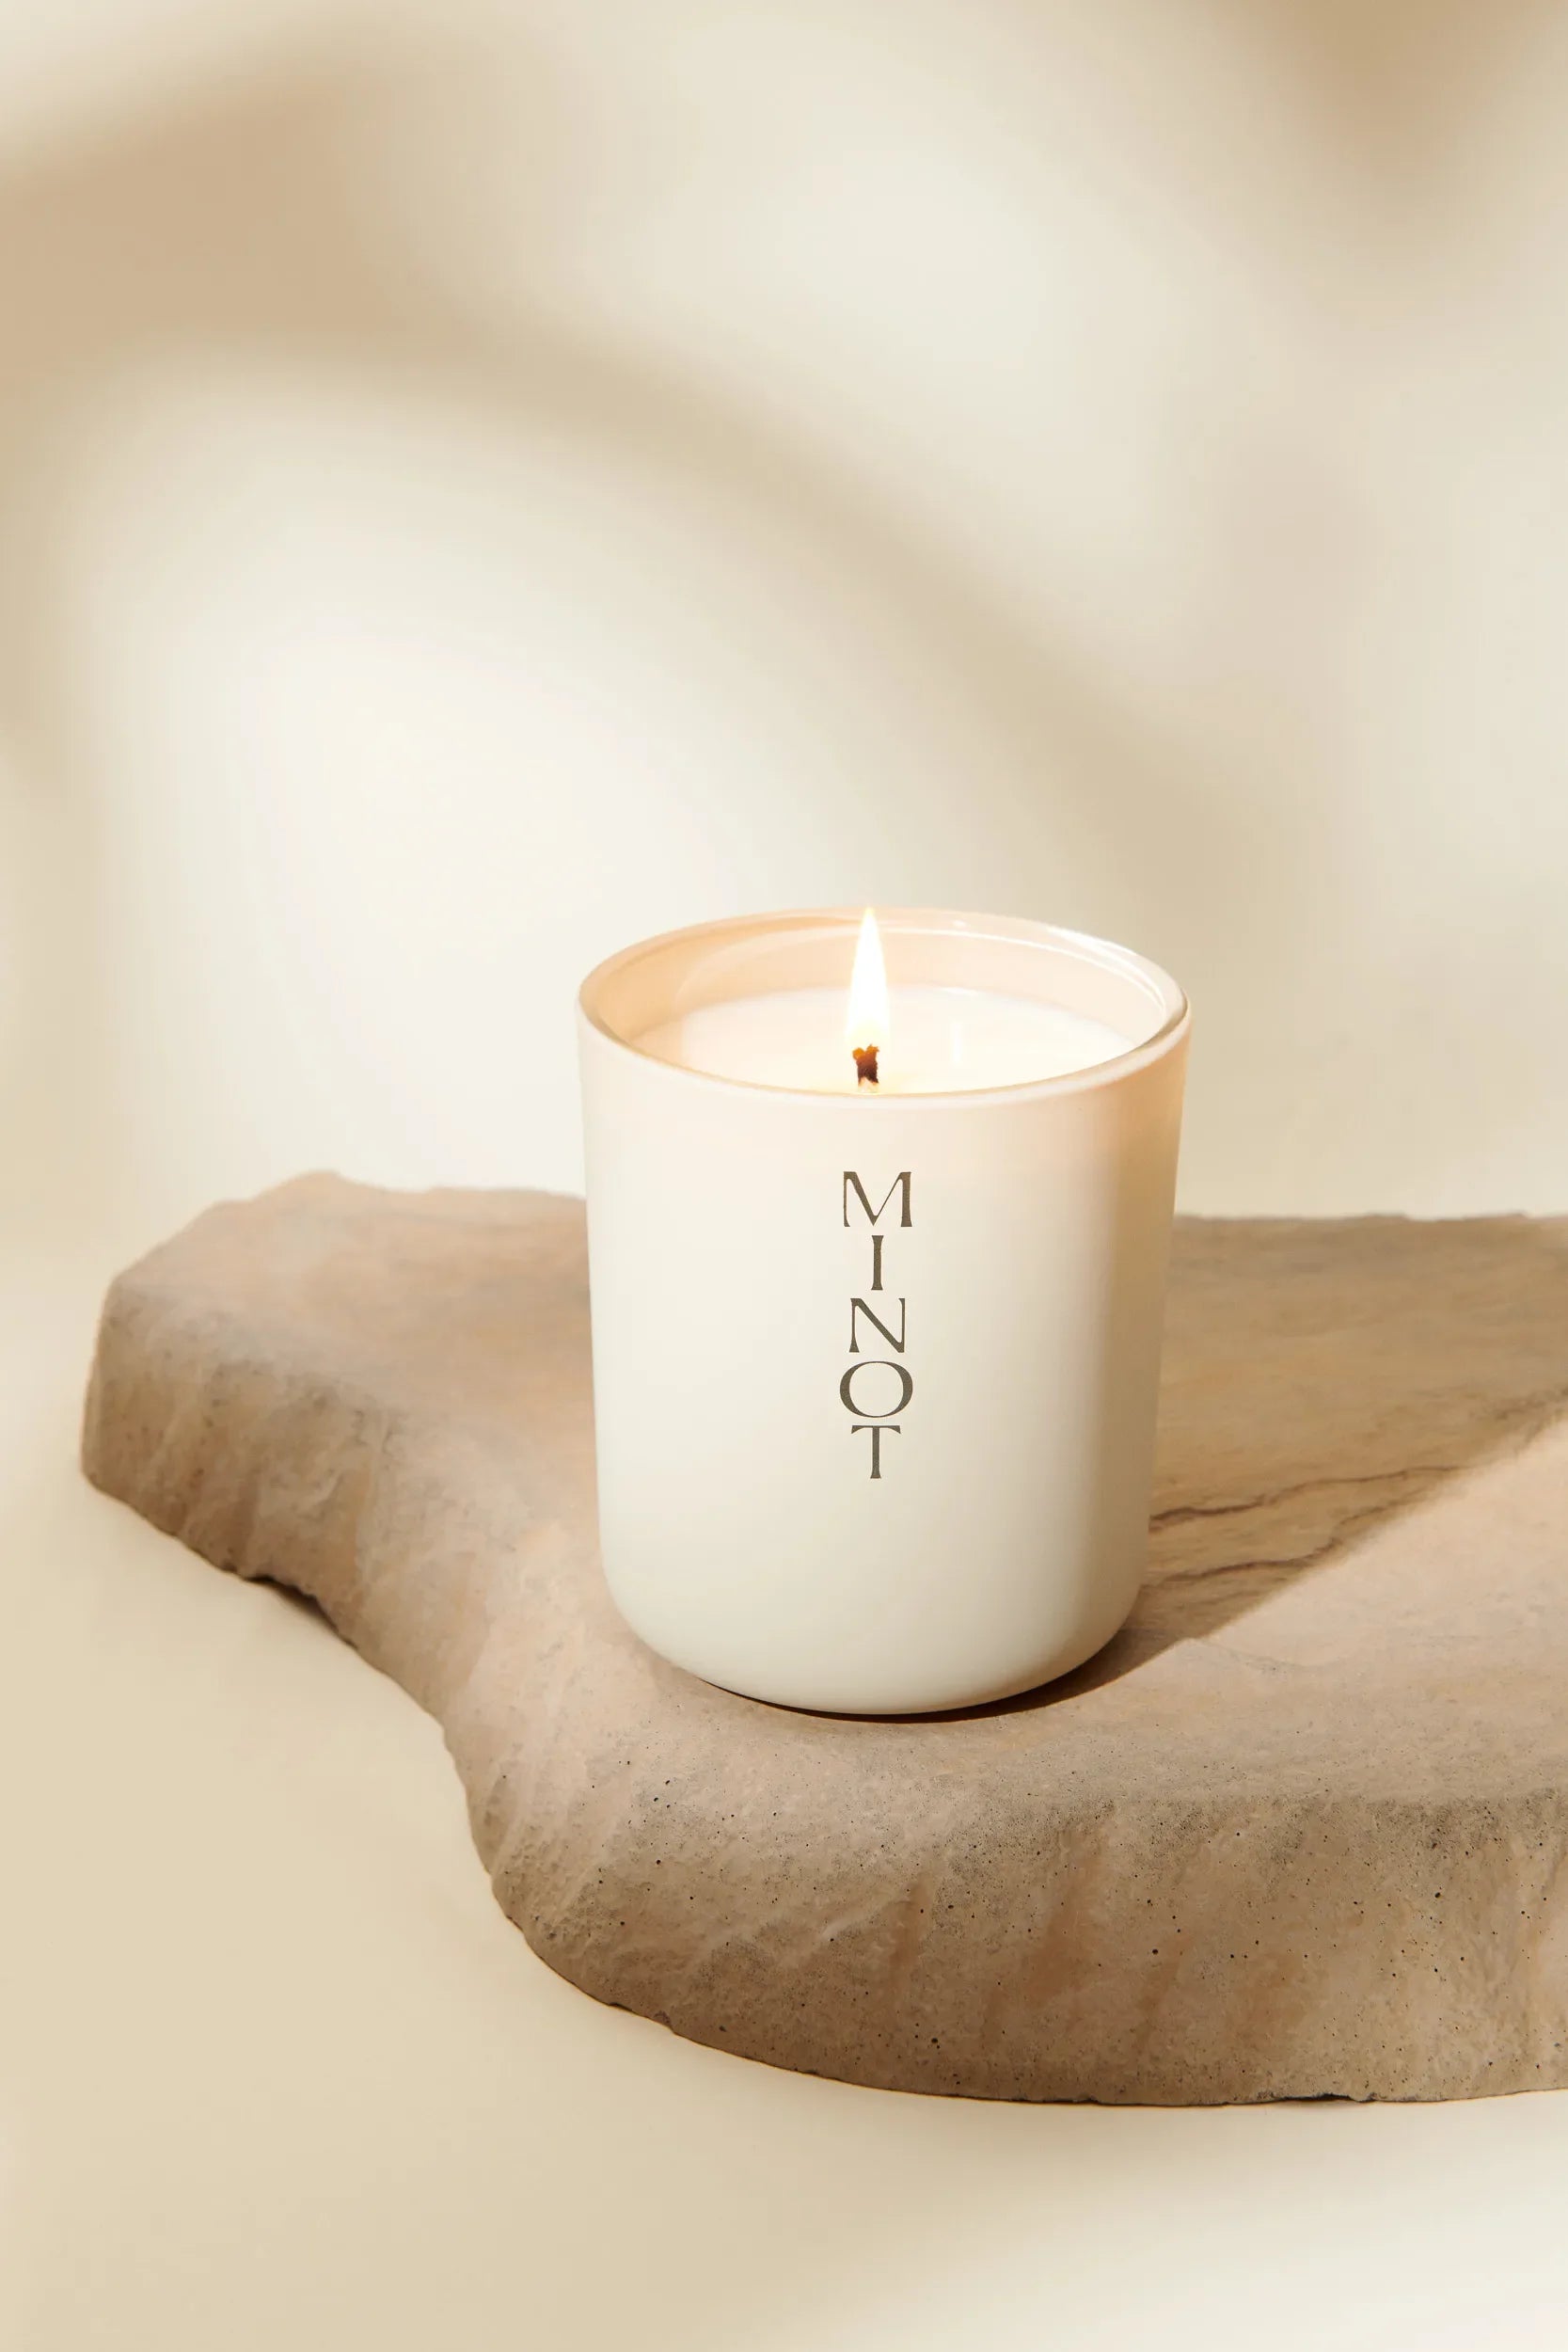 Sunbeam is a non-toxic, clean-burning citrus scented candle with bright notes of freesia and vanilla